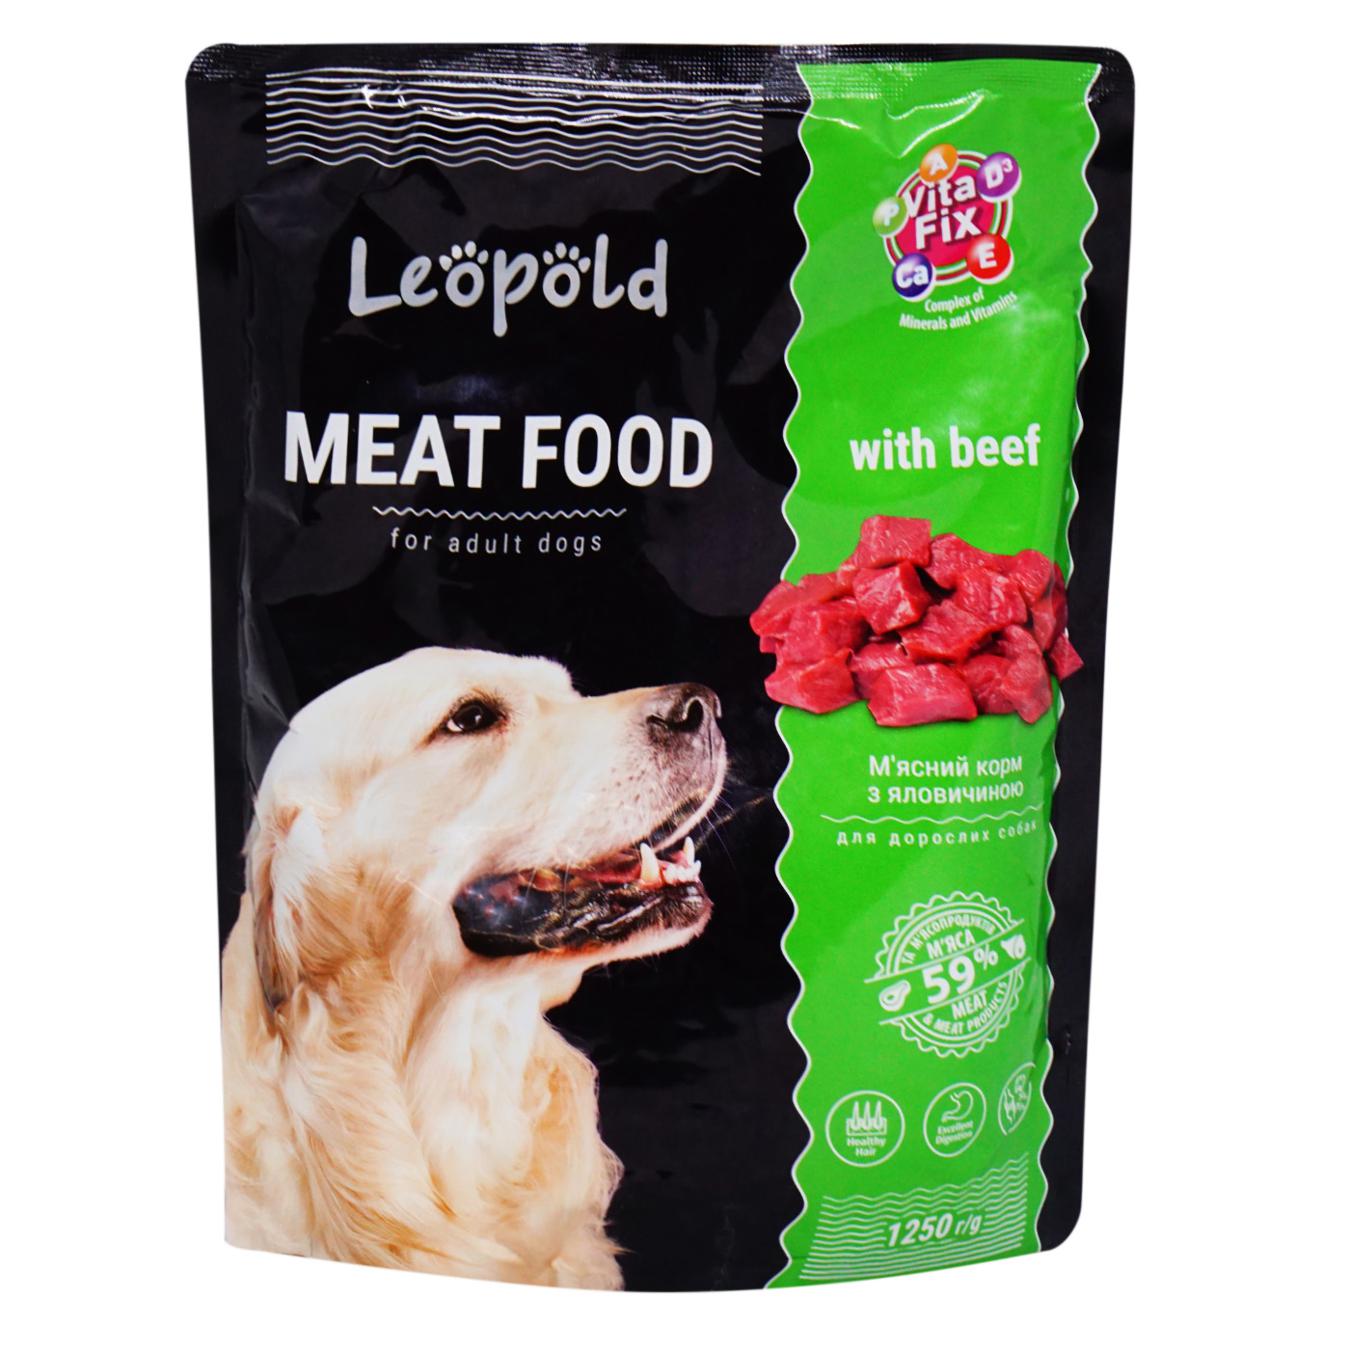 Food for dogs pouch Leopold with beef 1.25 kg